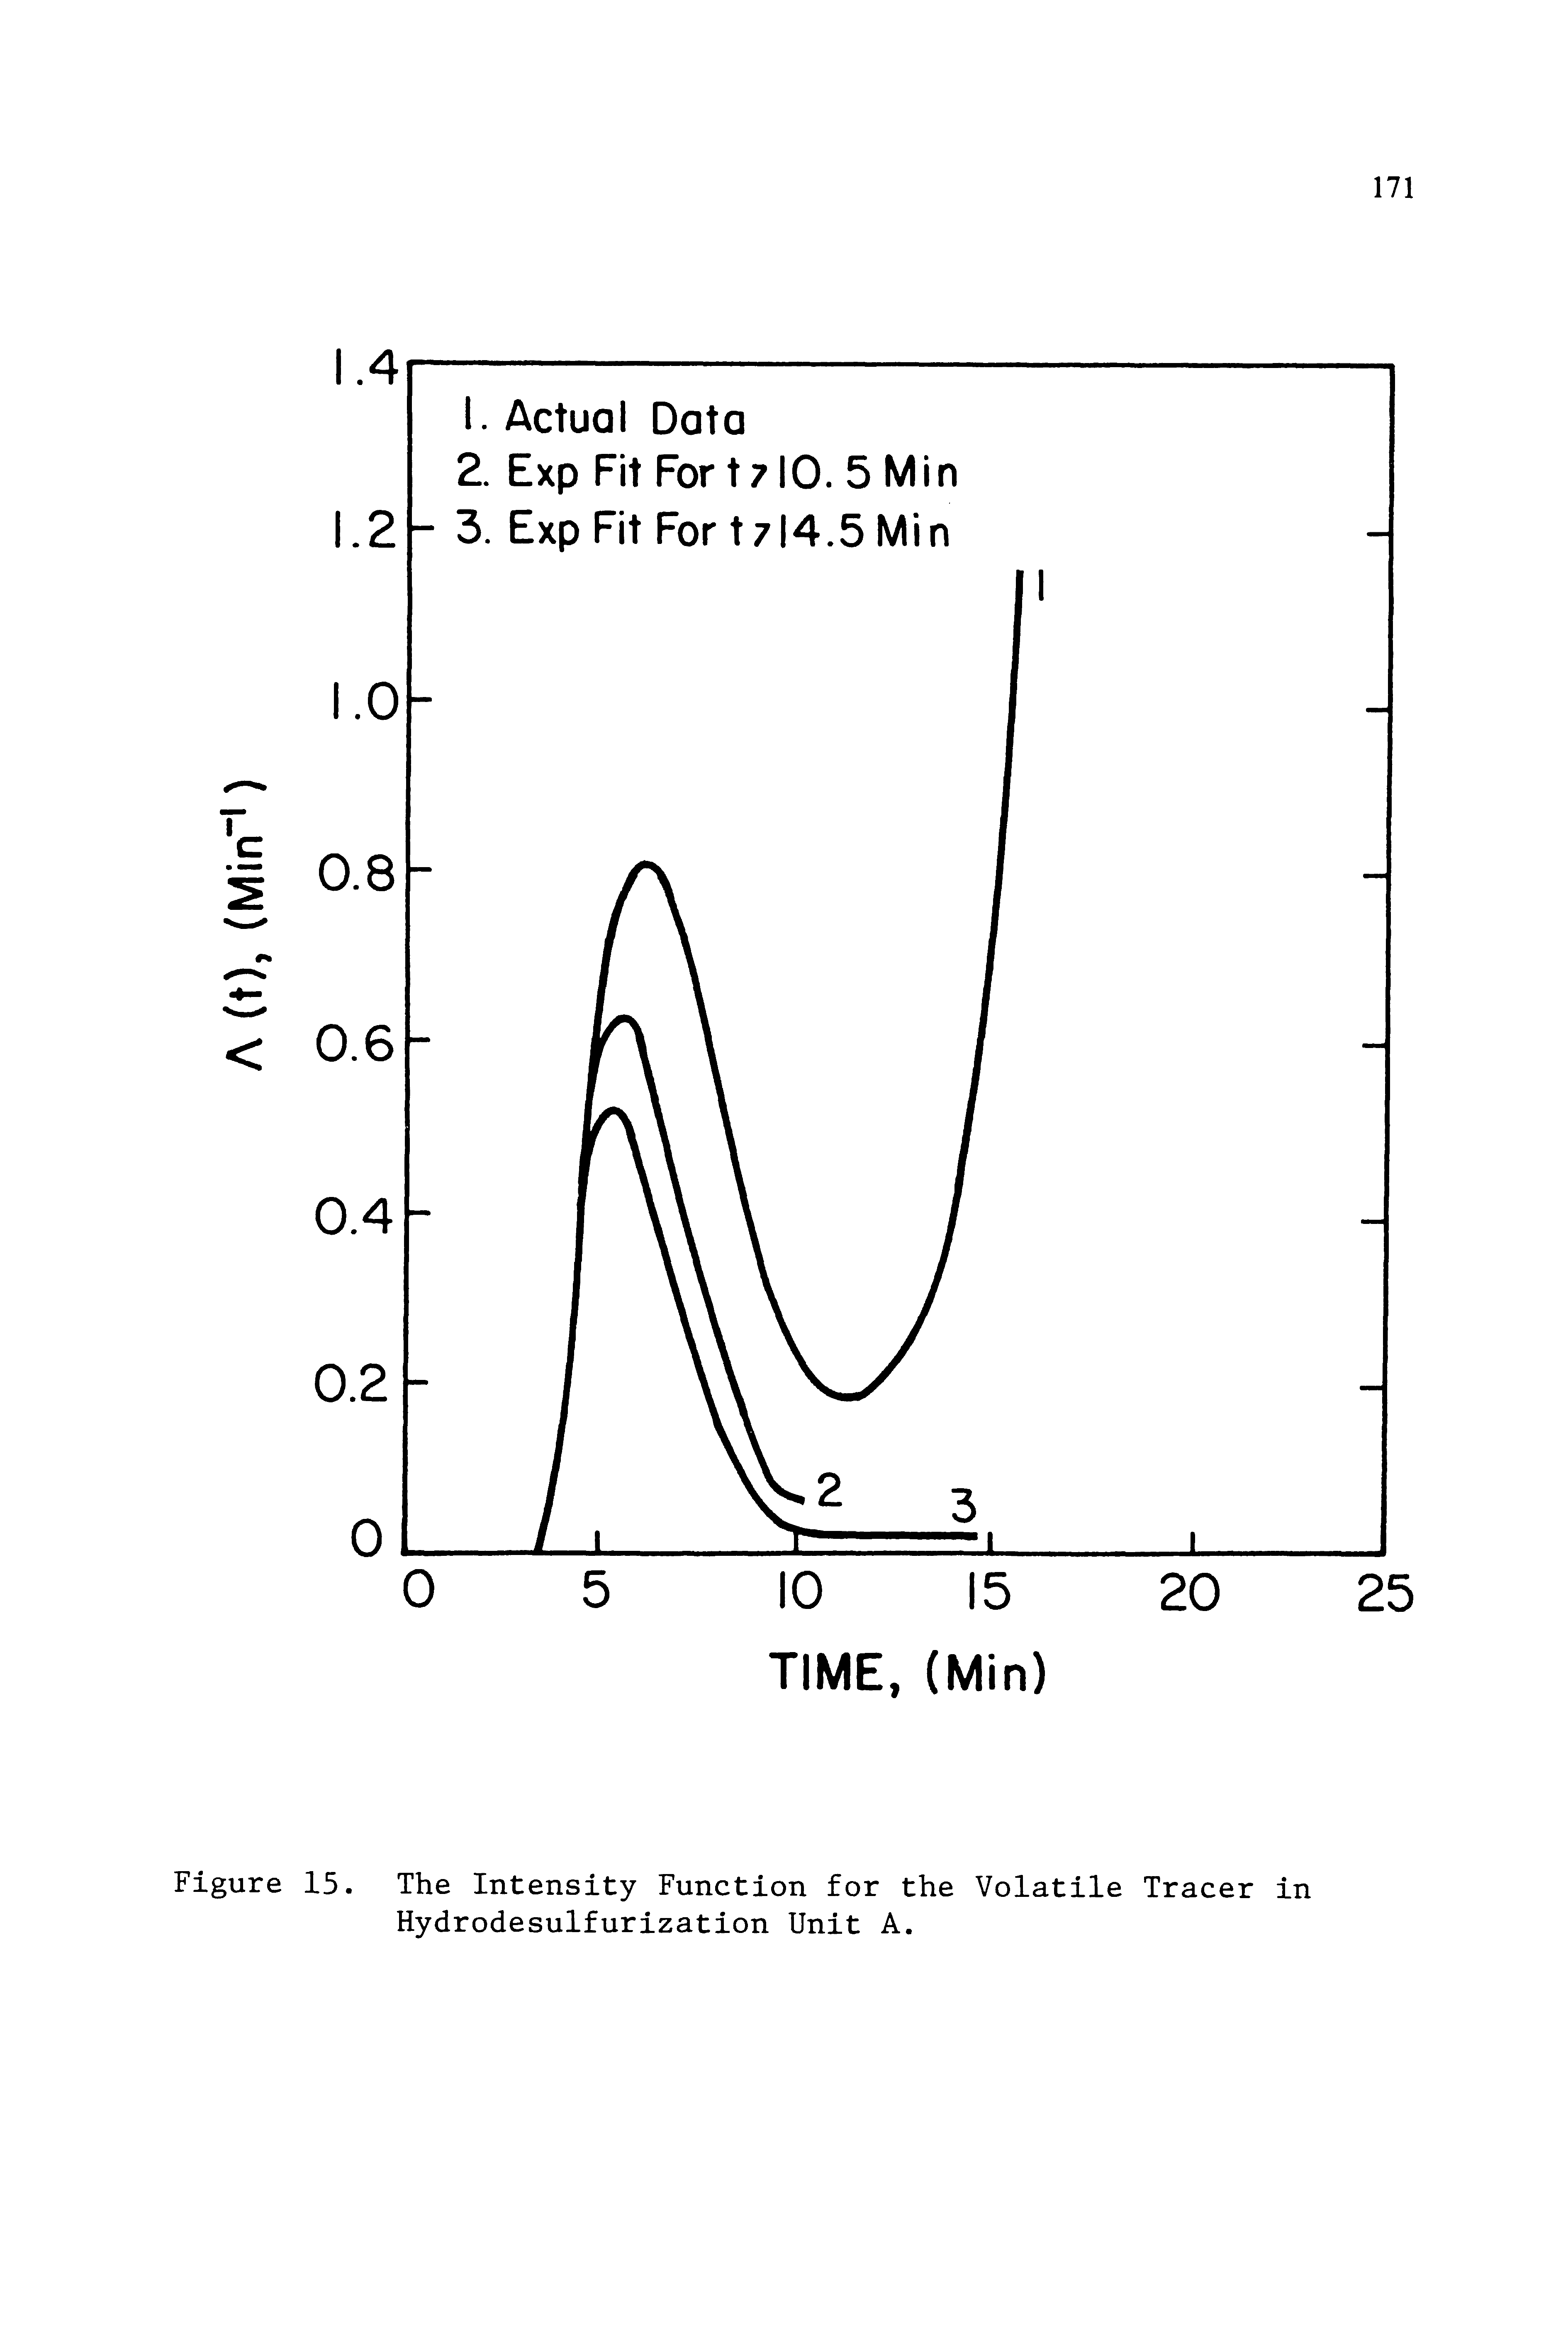 Figure 15. The Intensity Function for the Volatile Tracer in Hydrodesulfurization Unit A.